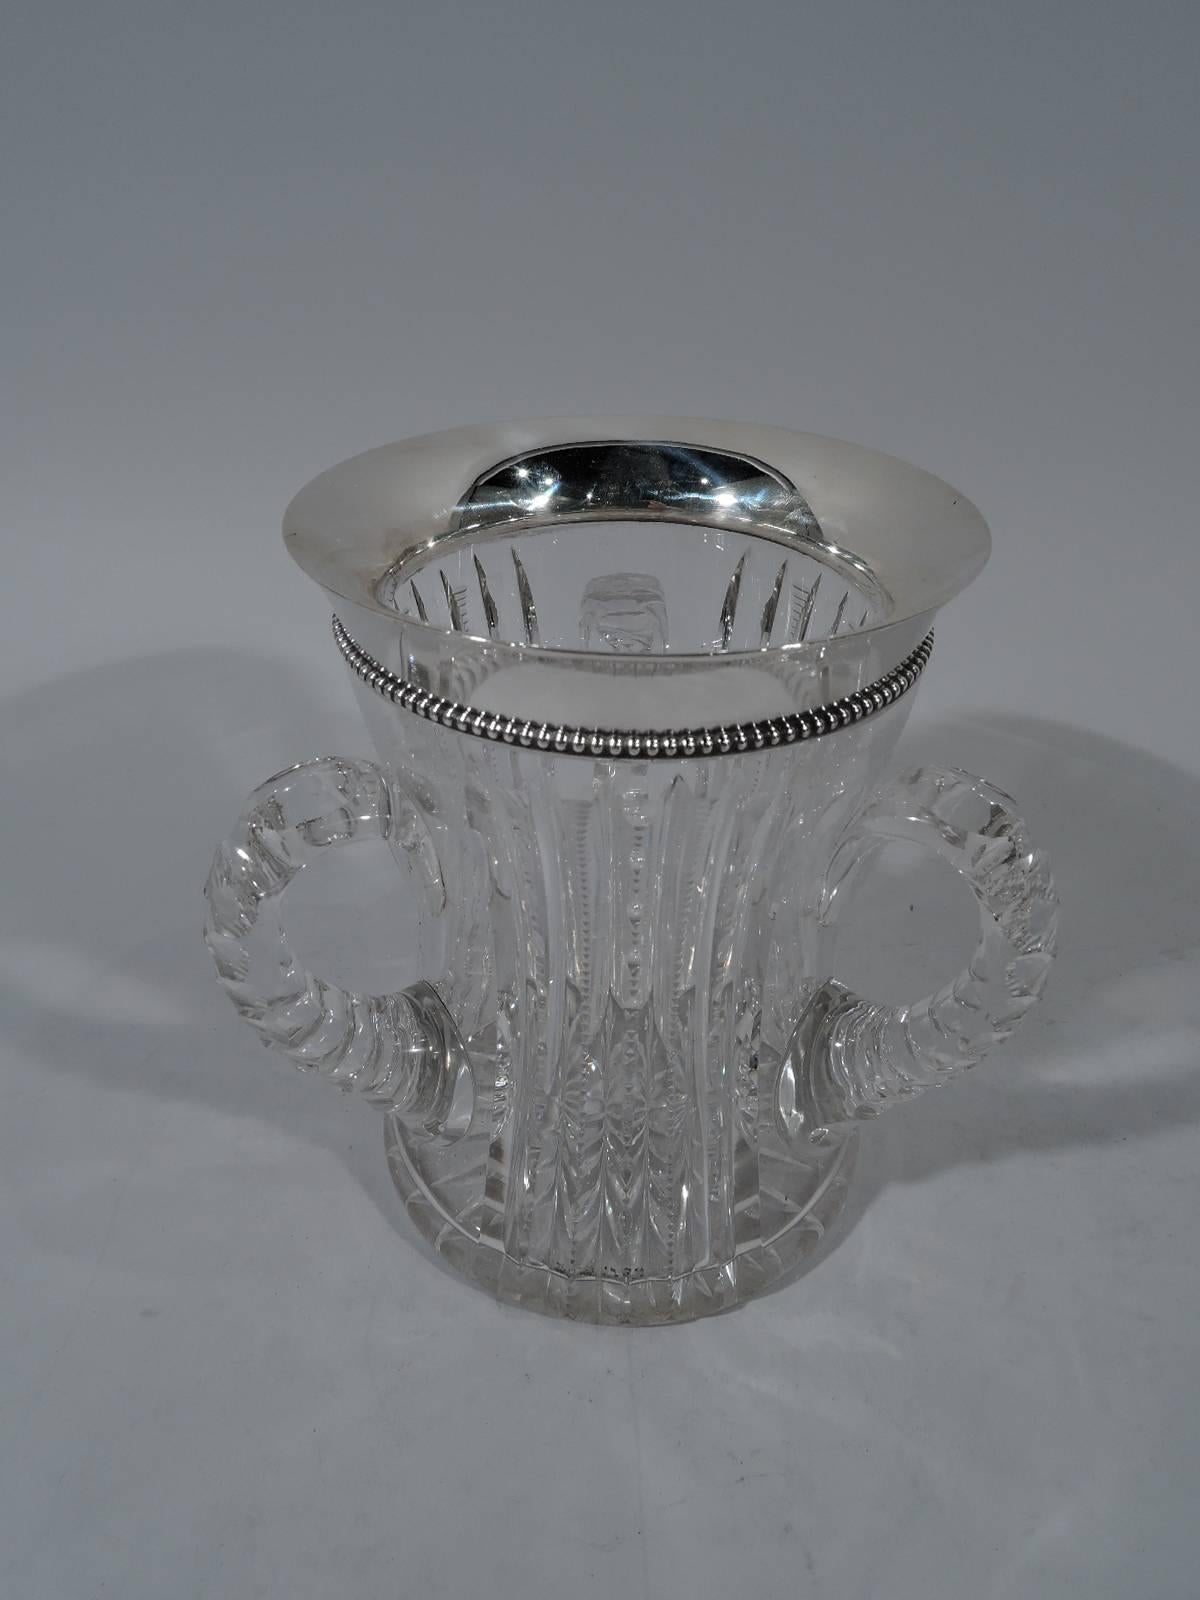 Brilliant-cut glass loving cup with sterling silver collar. Made by Wilcox (a division of International) in Meriden, Conn., circa 1900. Concave cylinder with 3 c-scroll handles. Notched flutes and facets. Flared collar with beaded rim. Hallmarked.